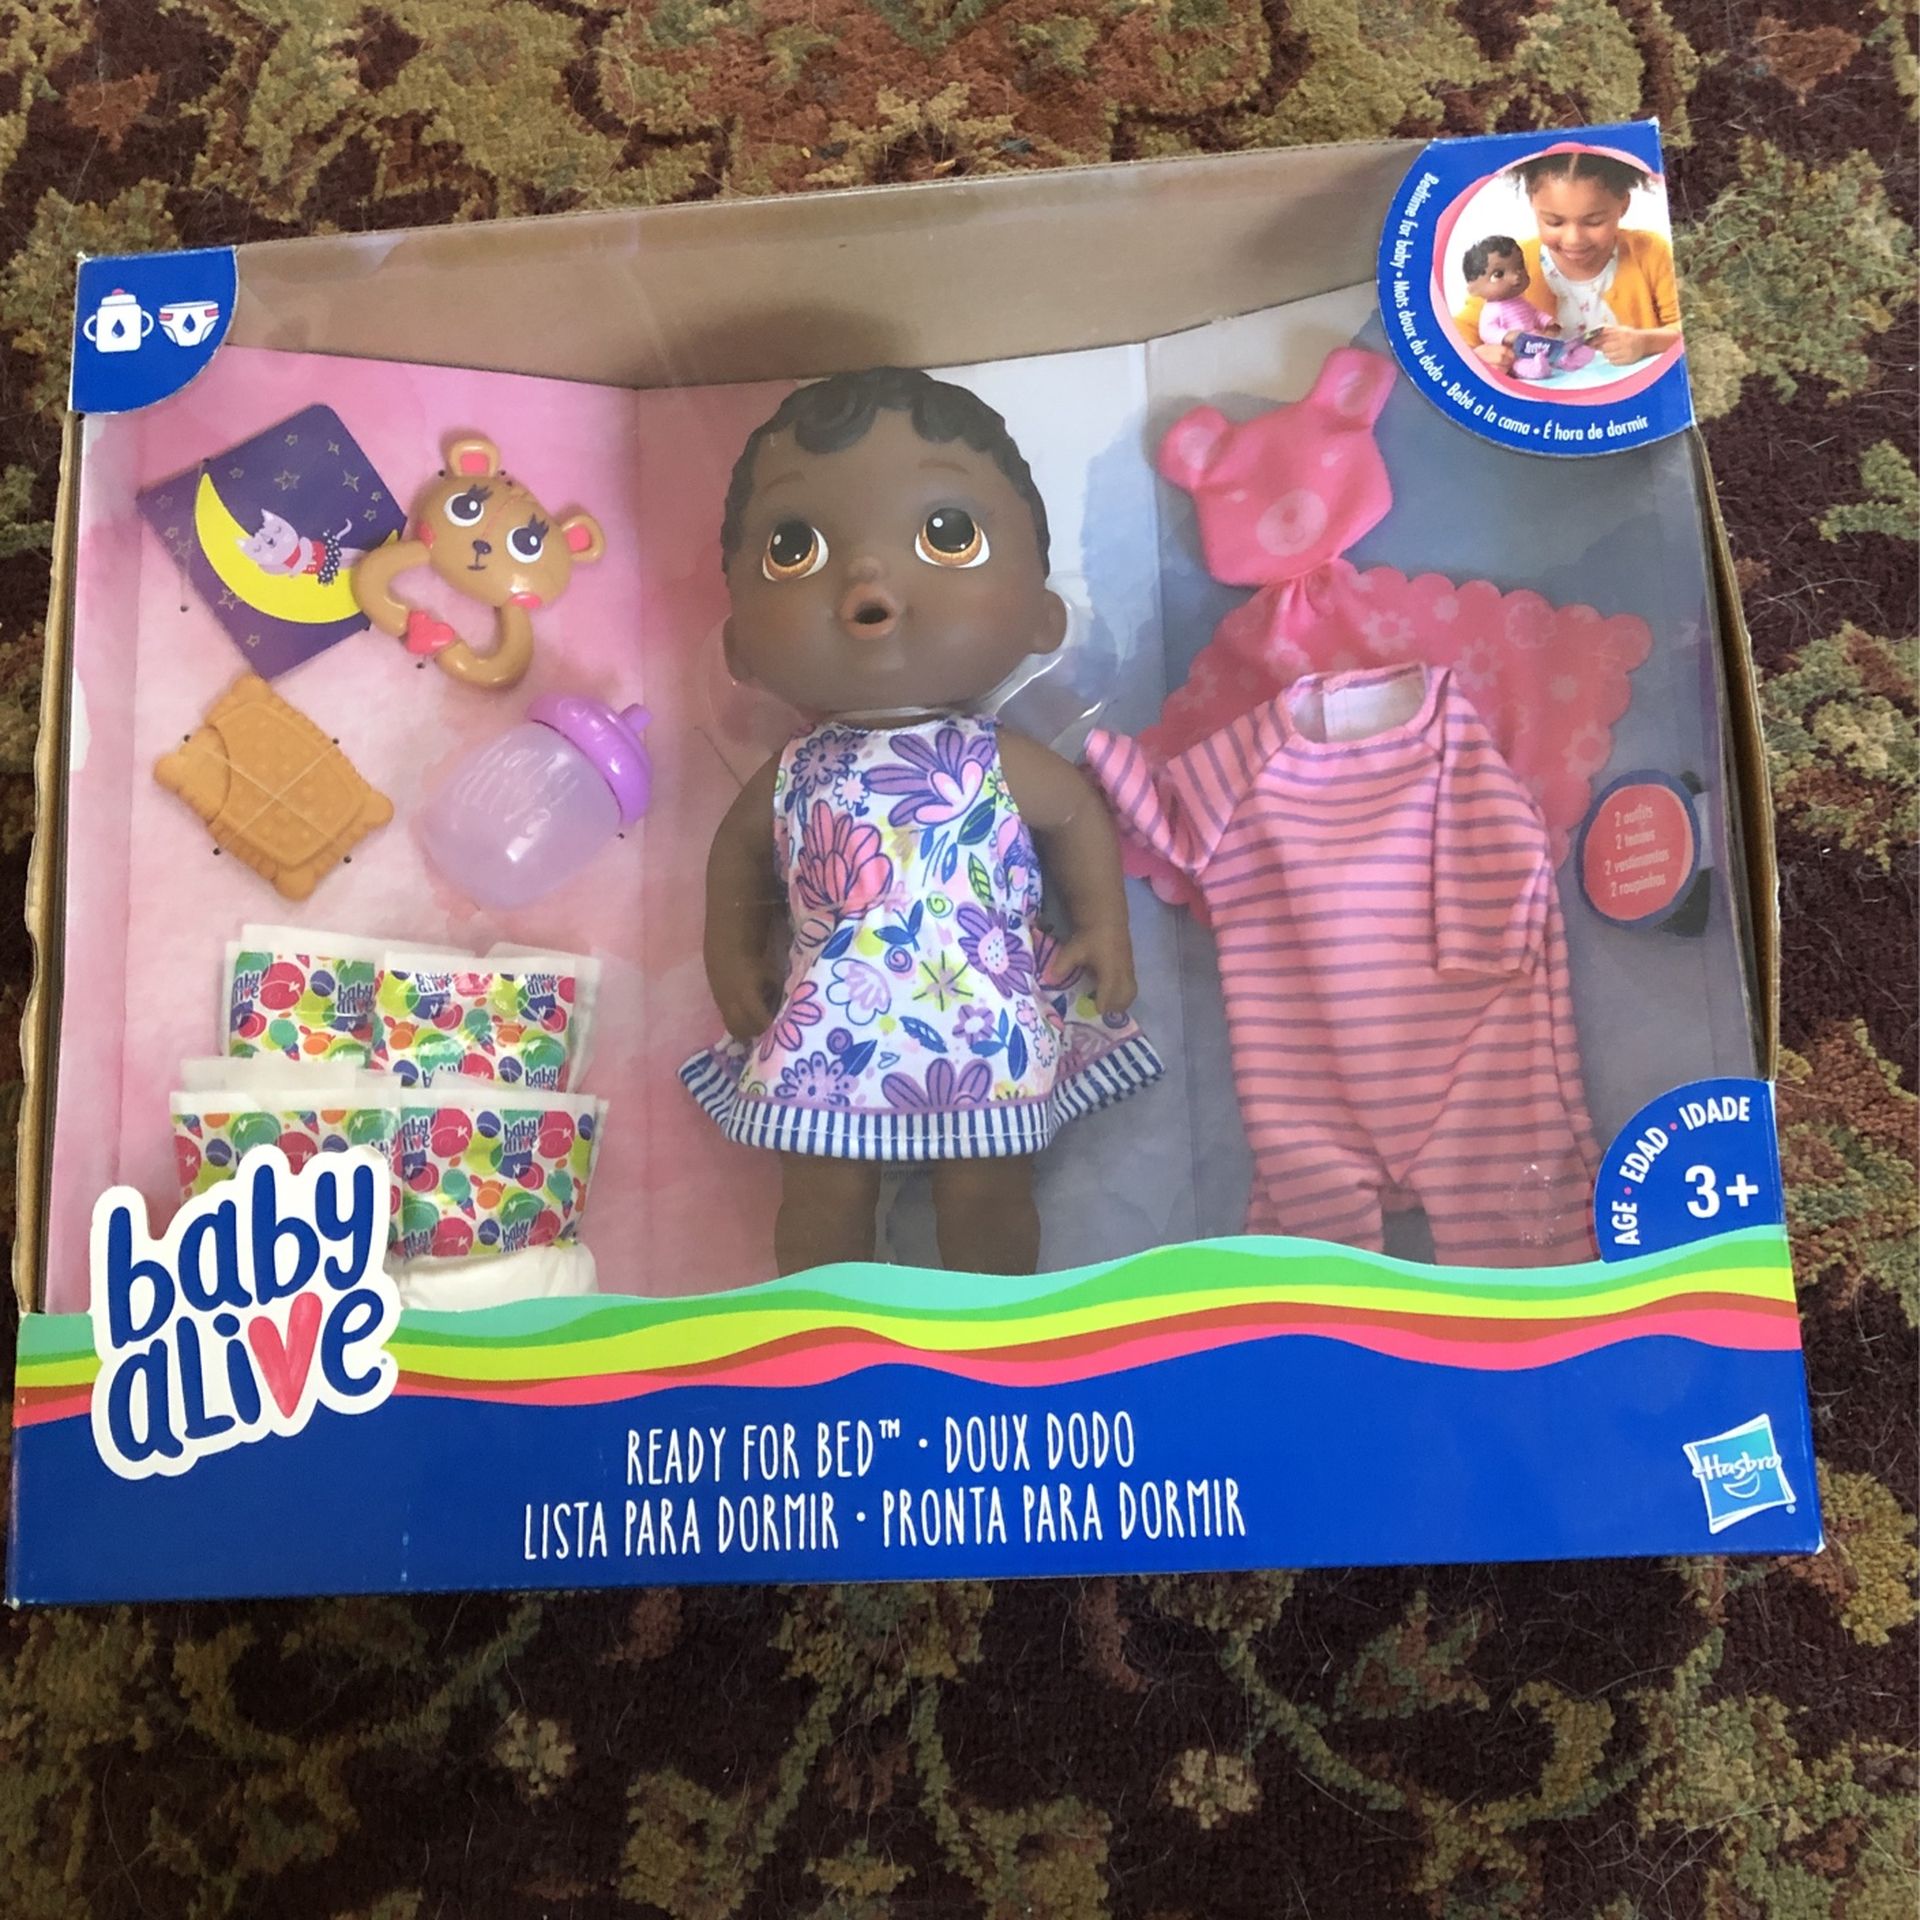 Baby Alive Doll.  Baby Alive . Doll. Girl Toy  New In Box